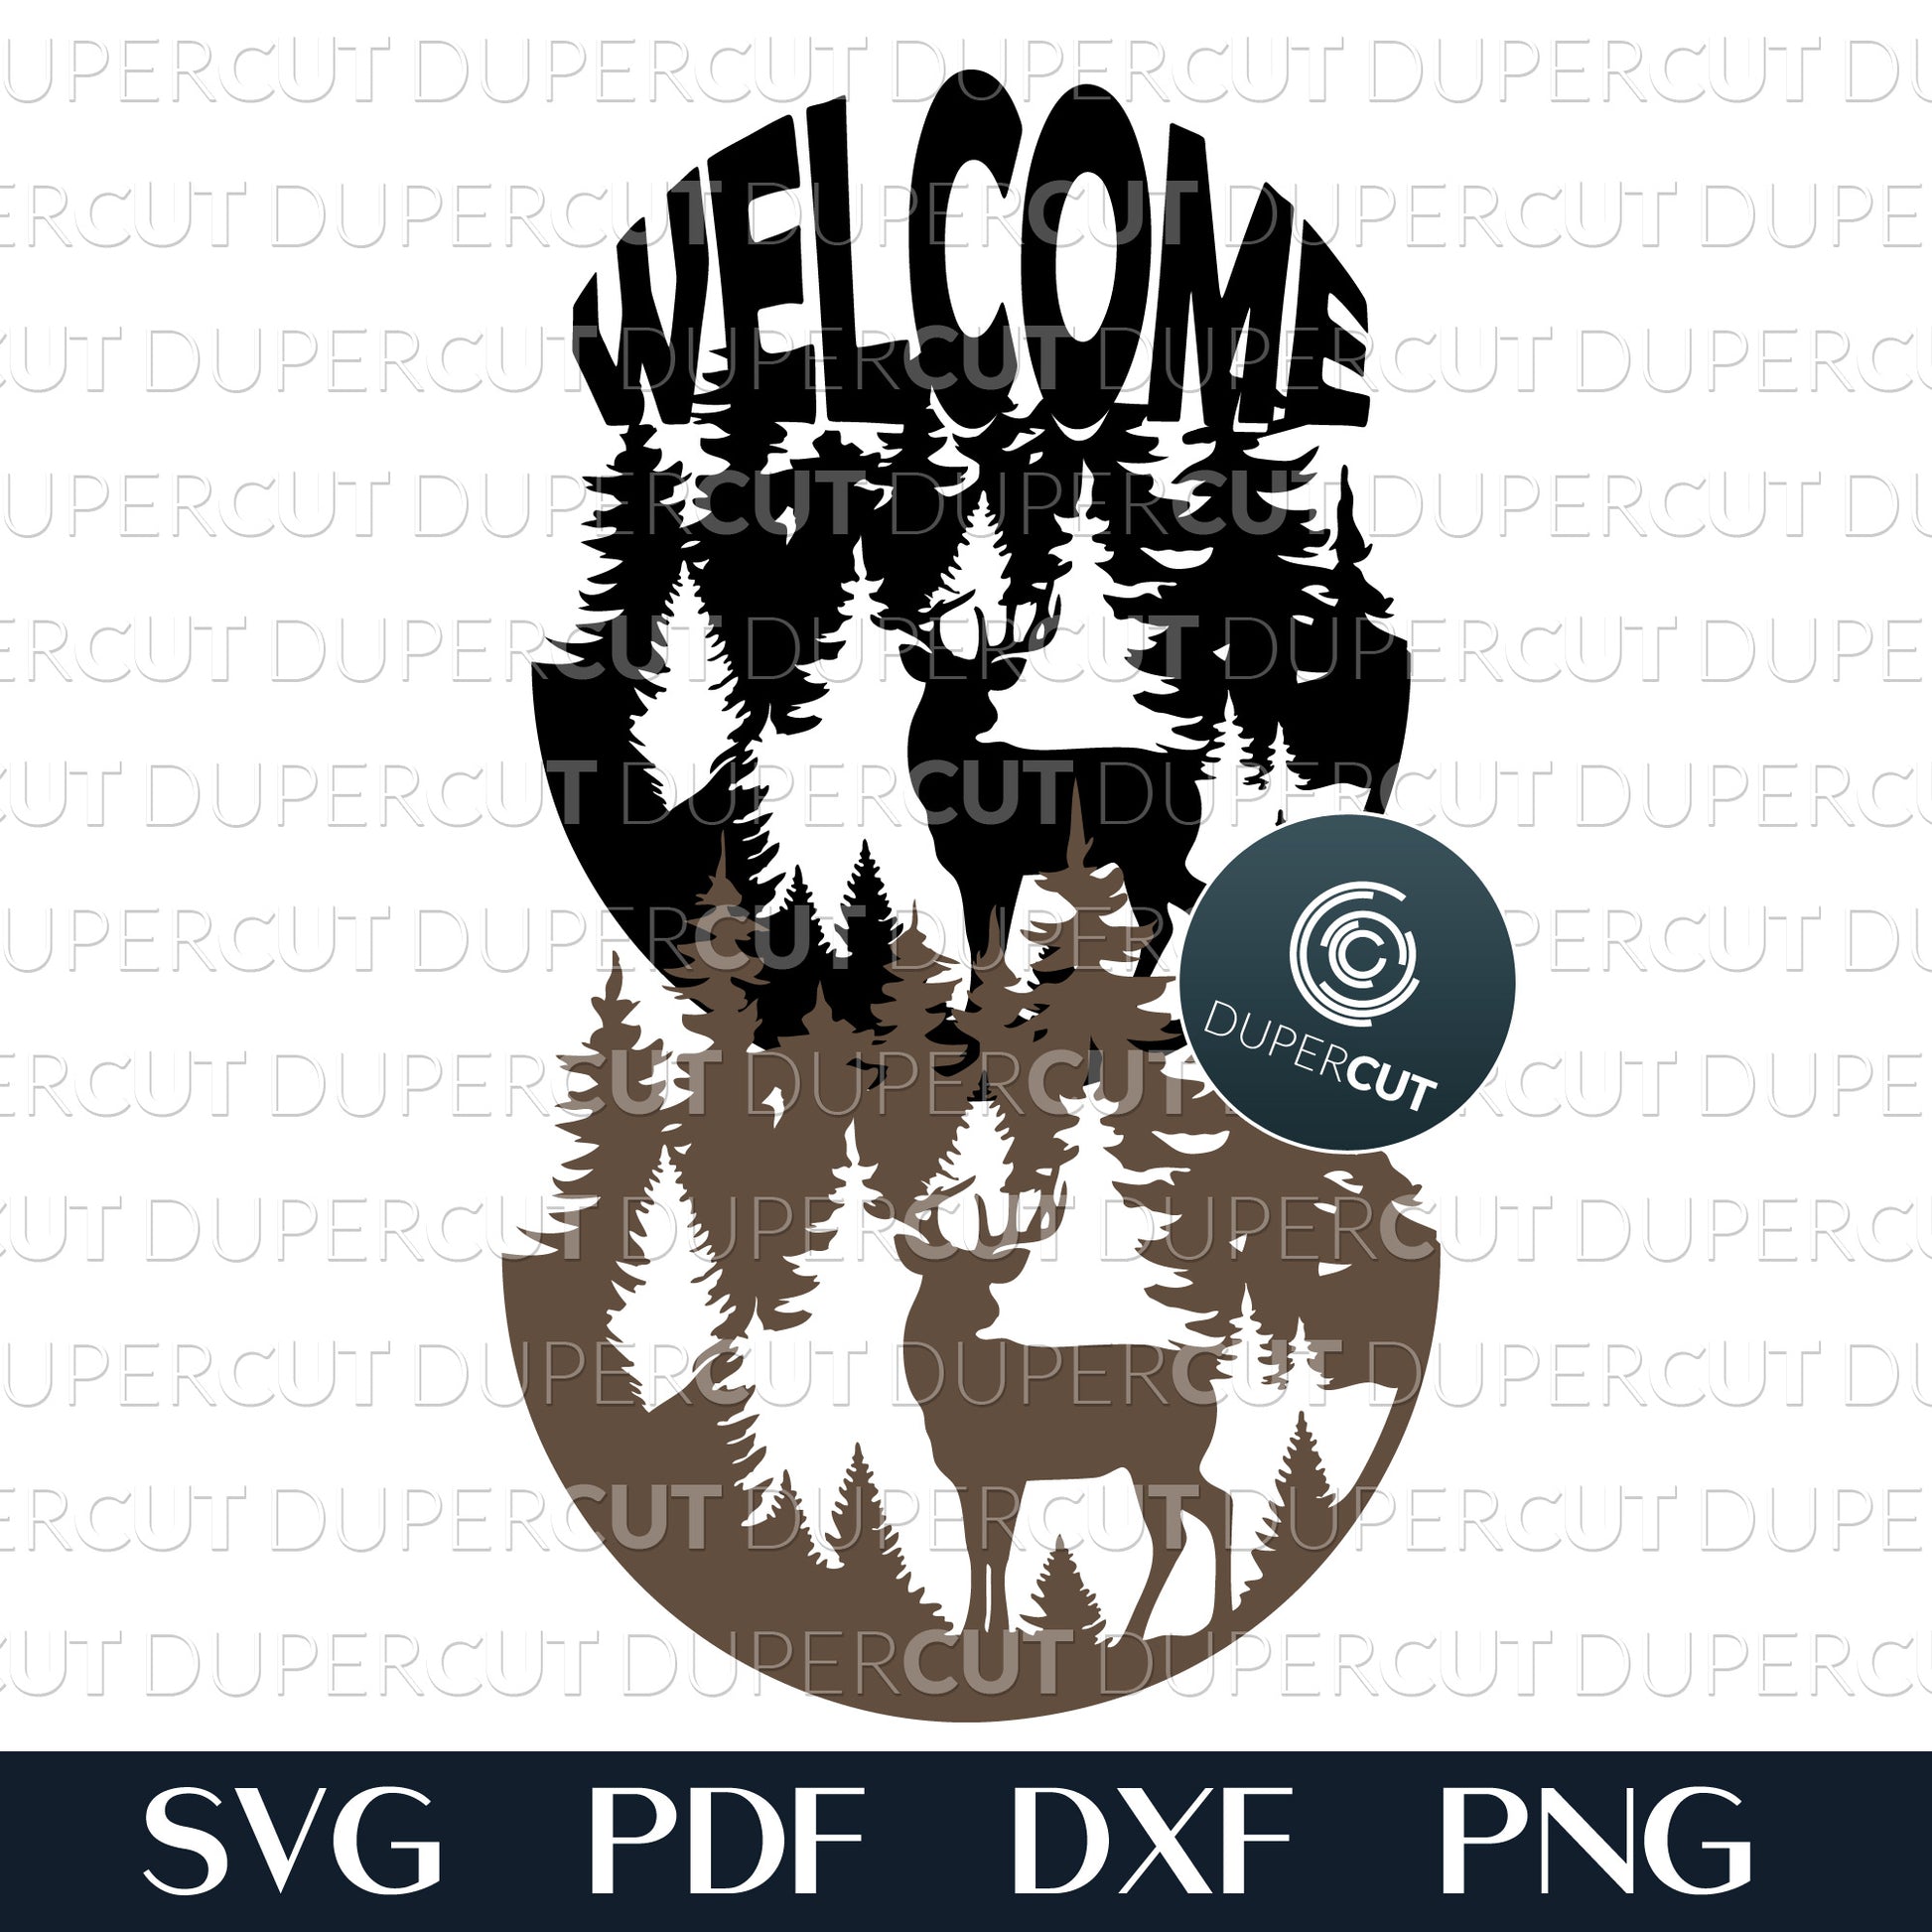 Deer in the woods welcome sign cabin decor - layered cutting files SVG PDF DXF template for laser cutting and engraving, Glowforge and CNC plasma machines